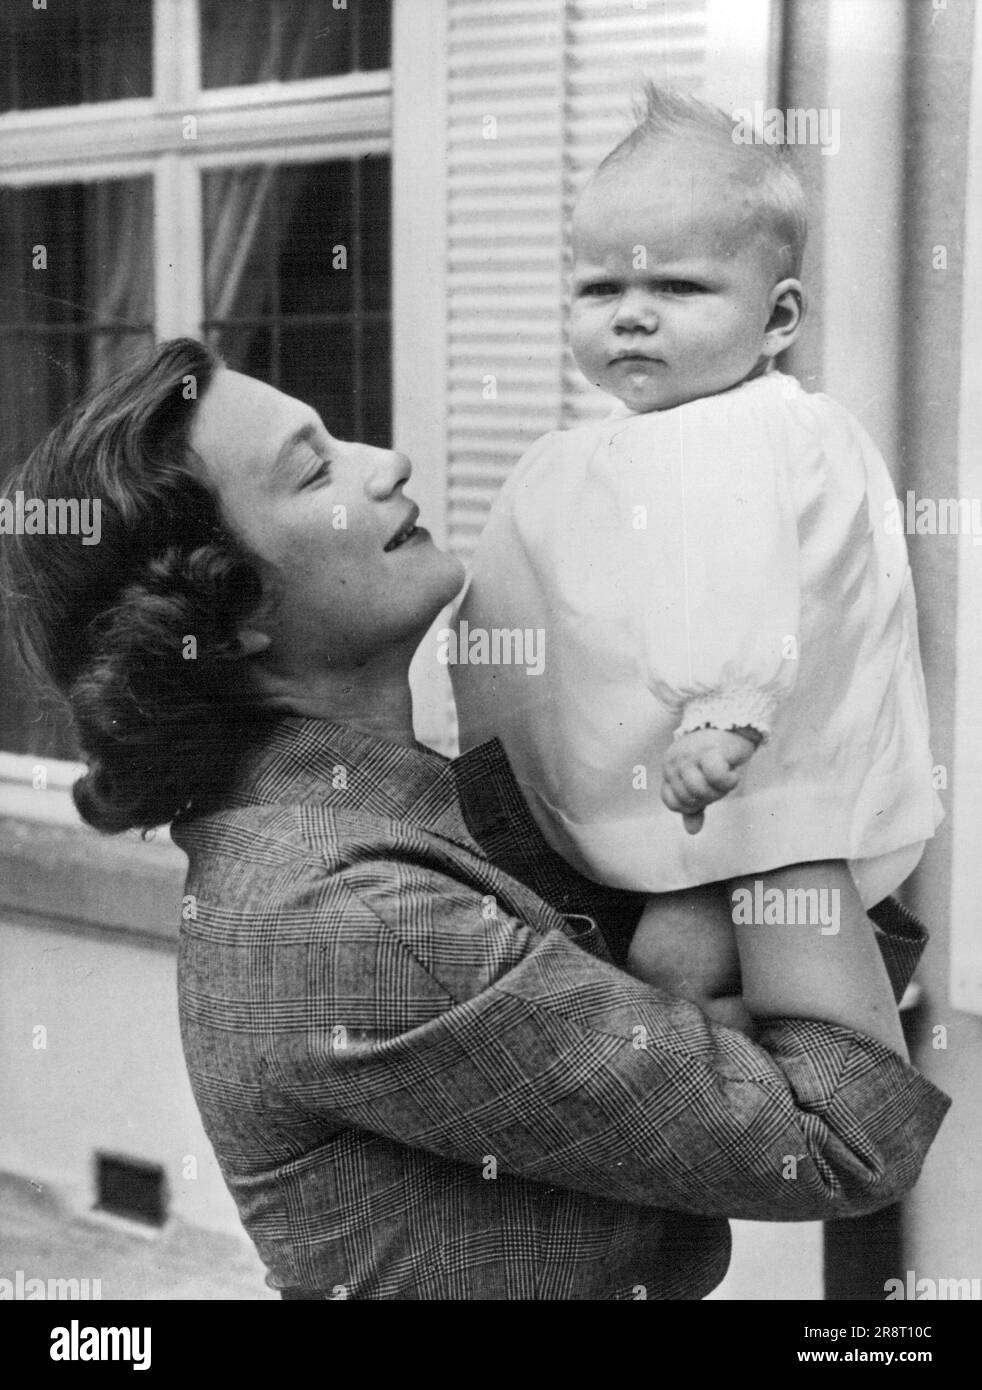 Princess Josephine-Charlotte and Princess Marie-Astrid Of Luxemburg Princess Josephine-Charlotte, daughters of ex-King Leopold of Belgium, holds aloft her six-months-old daughter, Marie-Astrid. - Princess Josephine-Charlotte is the wife of Prince Jean. Hereditary Grand Duke and Heir Apparent to the Throne of Luxemburg; they ware married in April, 1953. August 11, 1953. (Photo by Camera Press). Stock Photo